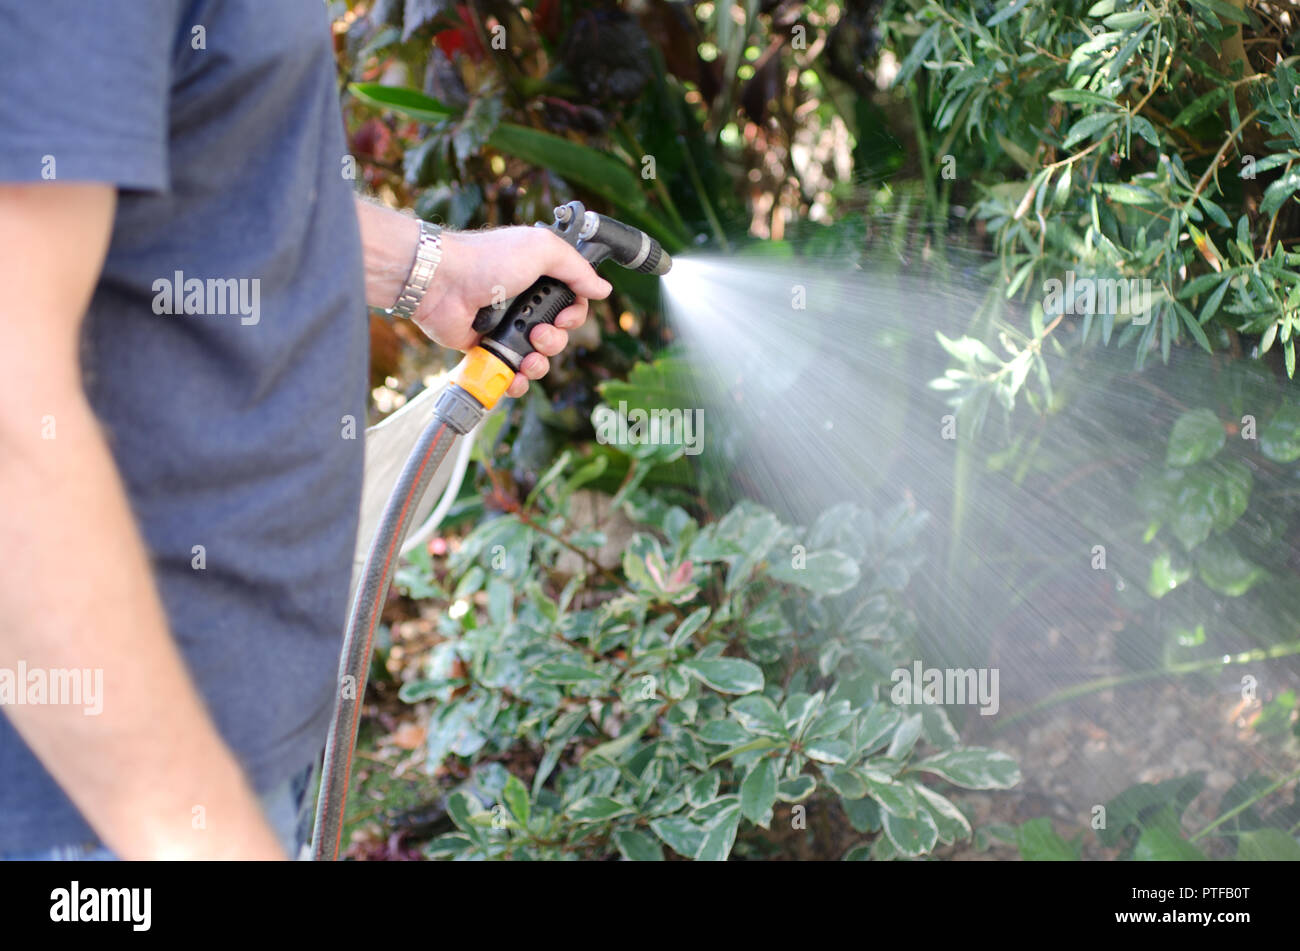 Watering the garden with a hosepipe Stock Photo